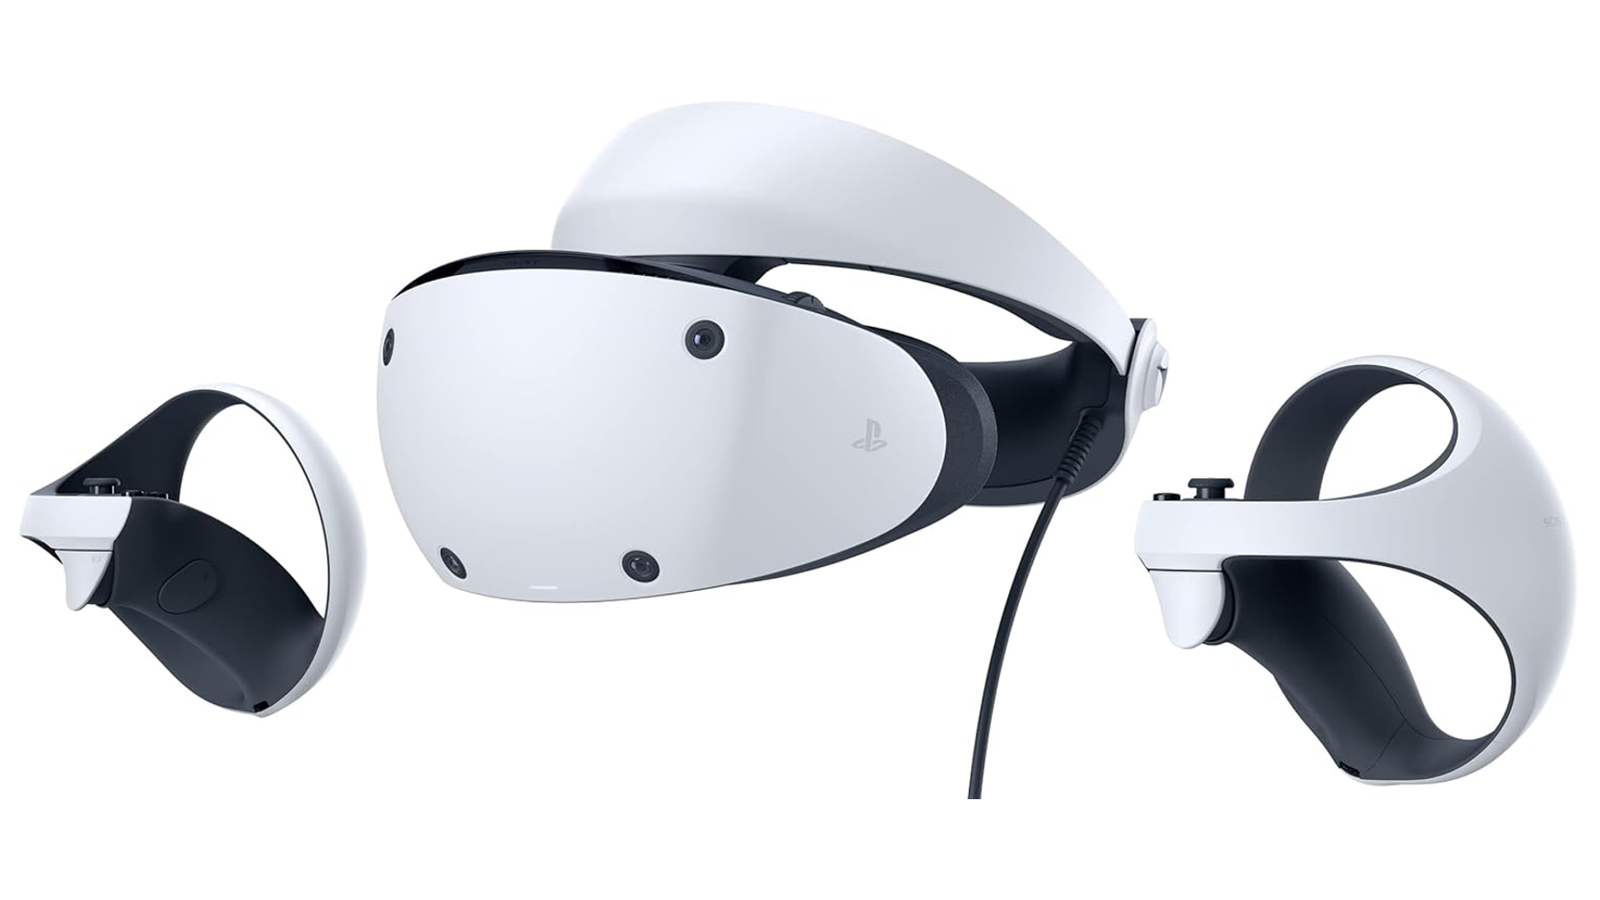 PlayStation VR2 Dream Dashed: Could Price Cuts Save the Day?